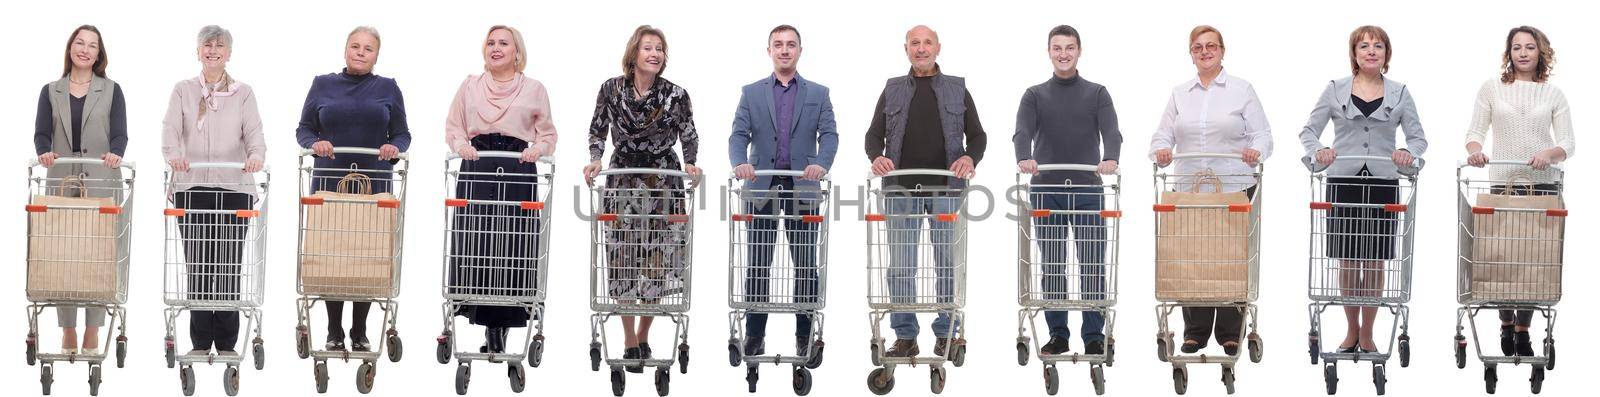 collage group of people with cart isolated on white by asdf